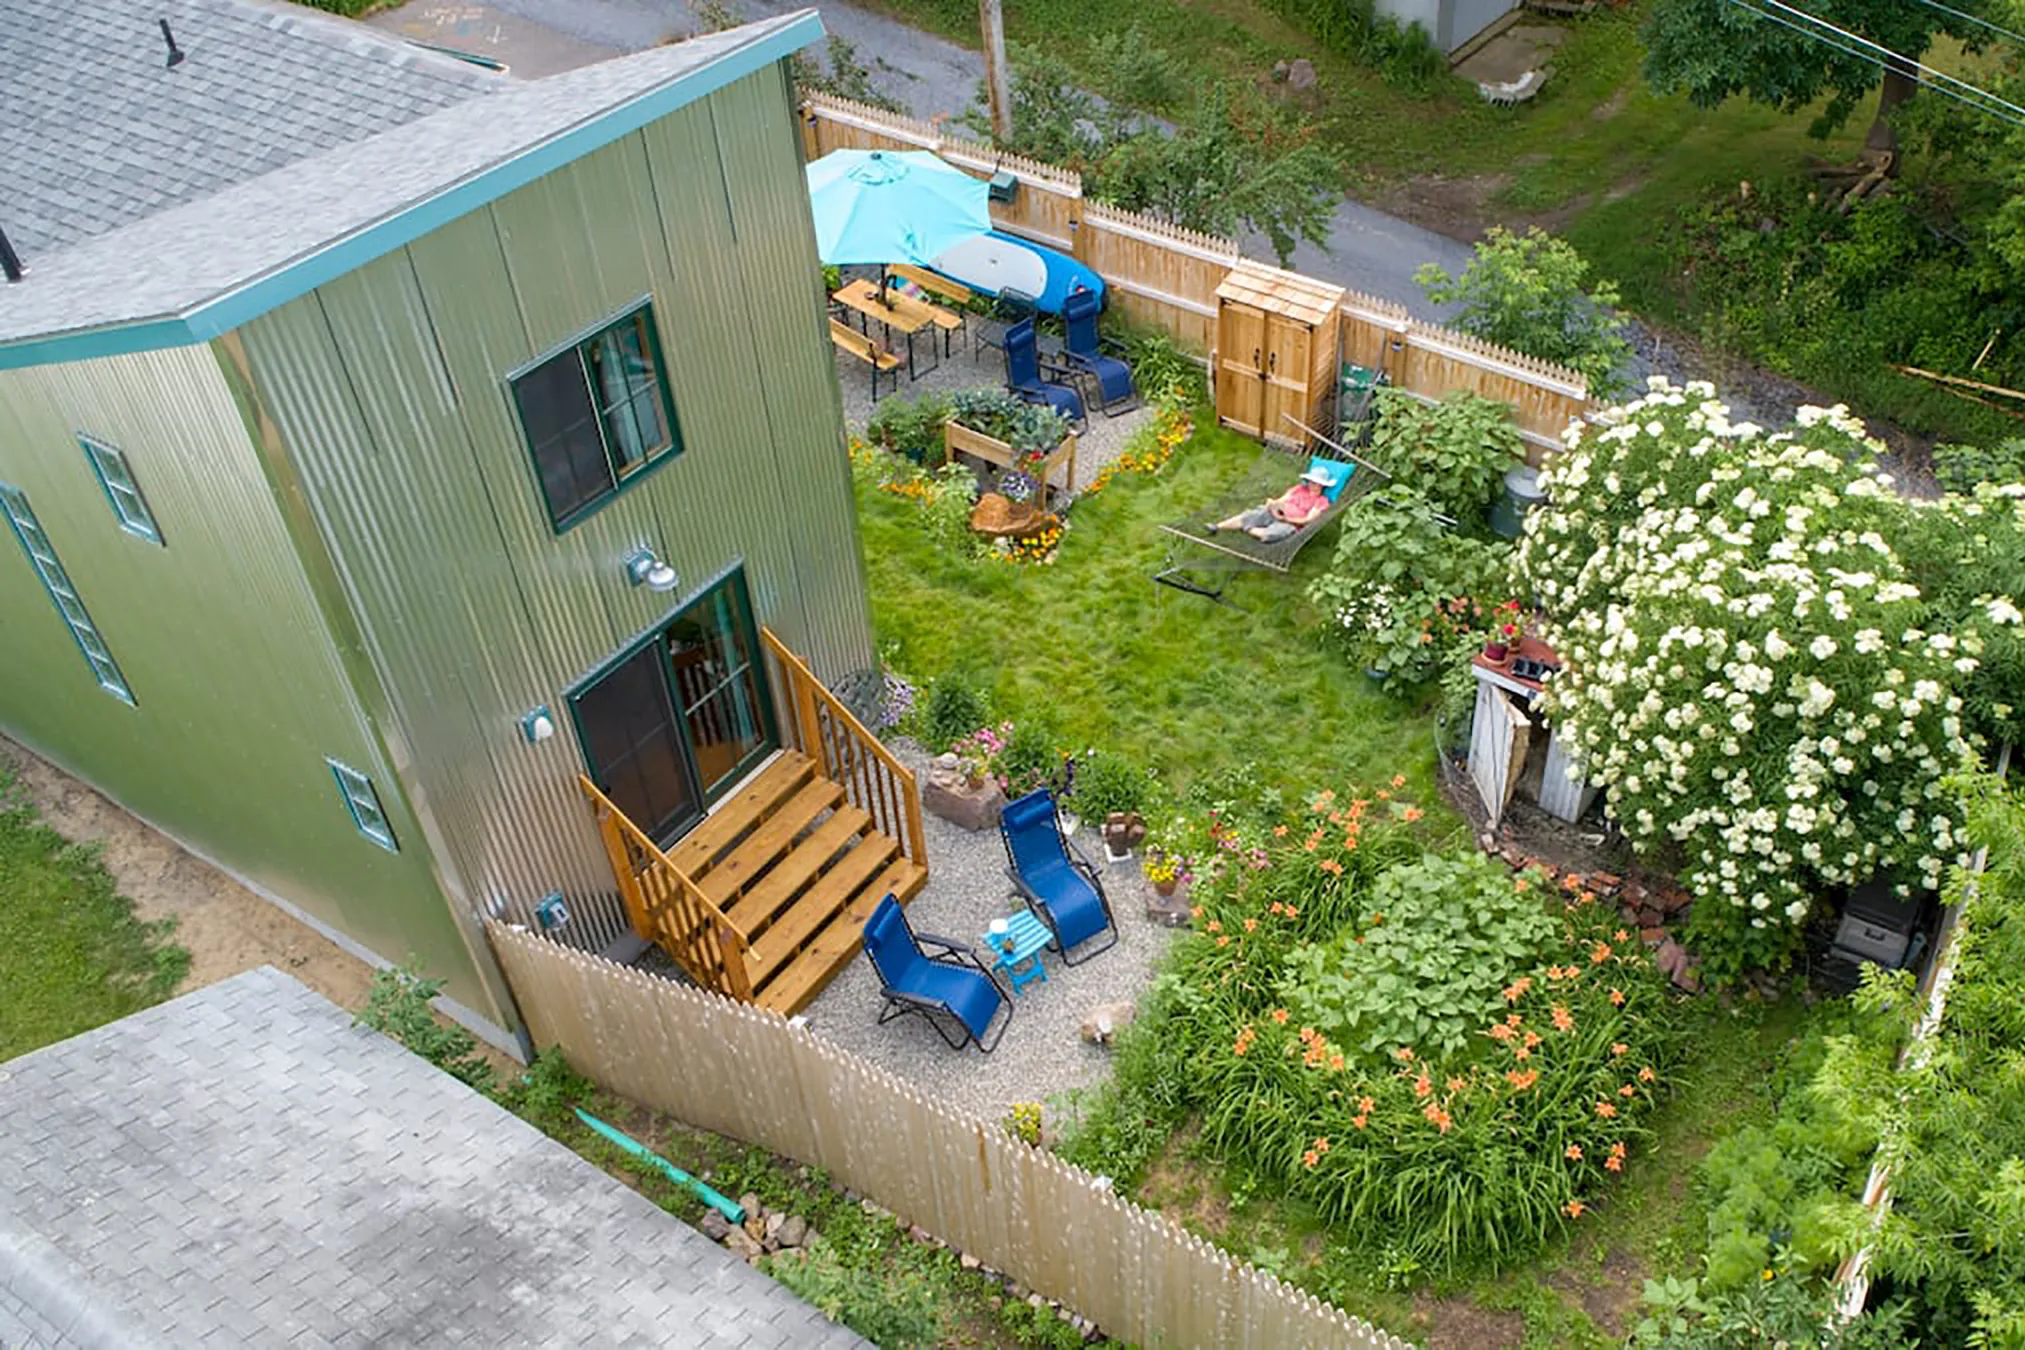 An arial photograph of the backyard of a green house with a lush garden and blue lounge chairs